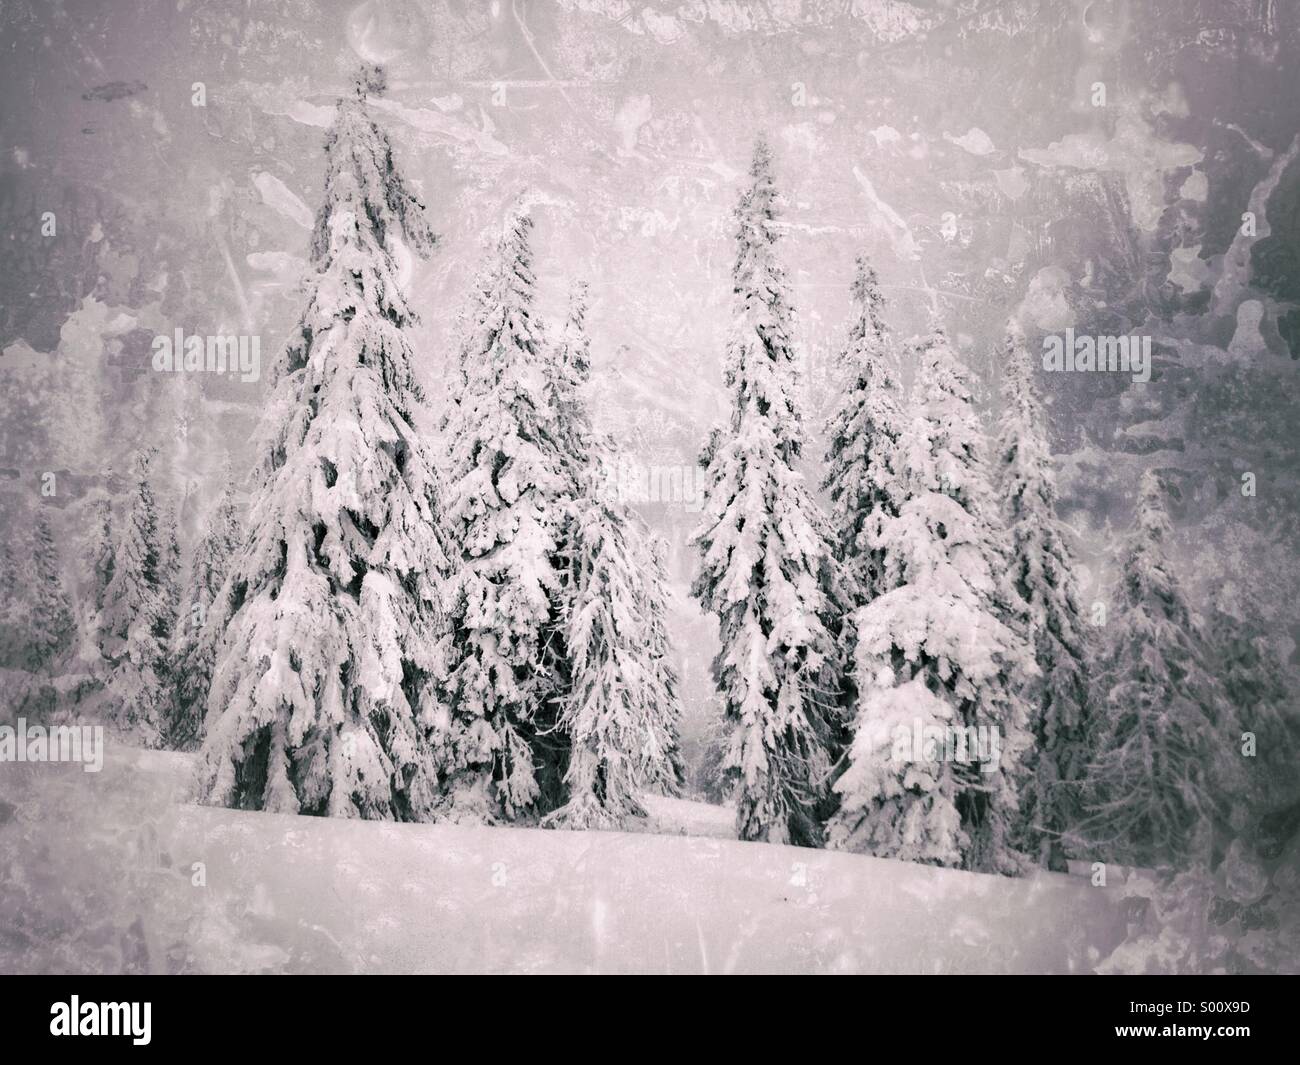 Wet plate collodion photo of trees covered in snow Stock Photo